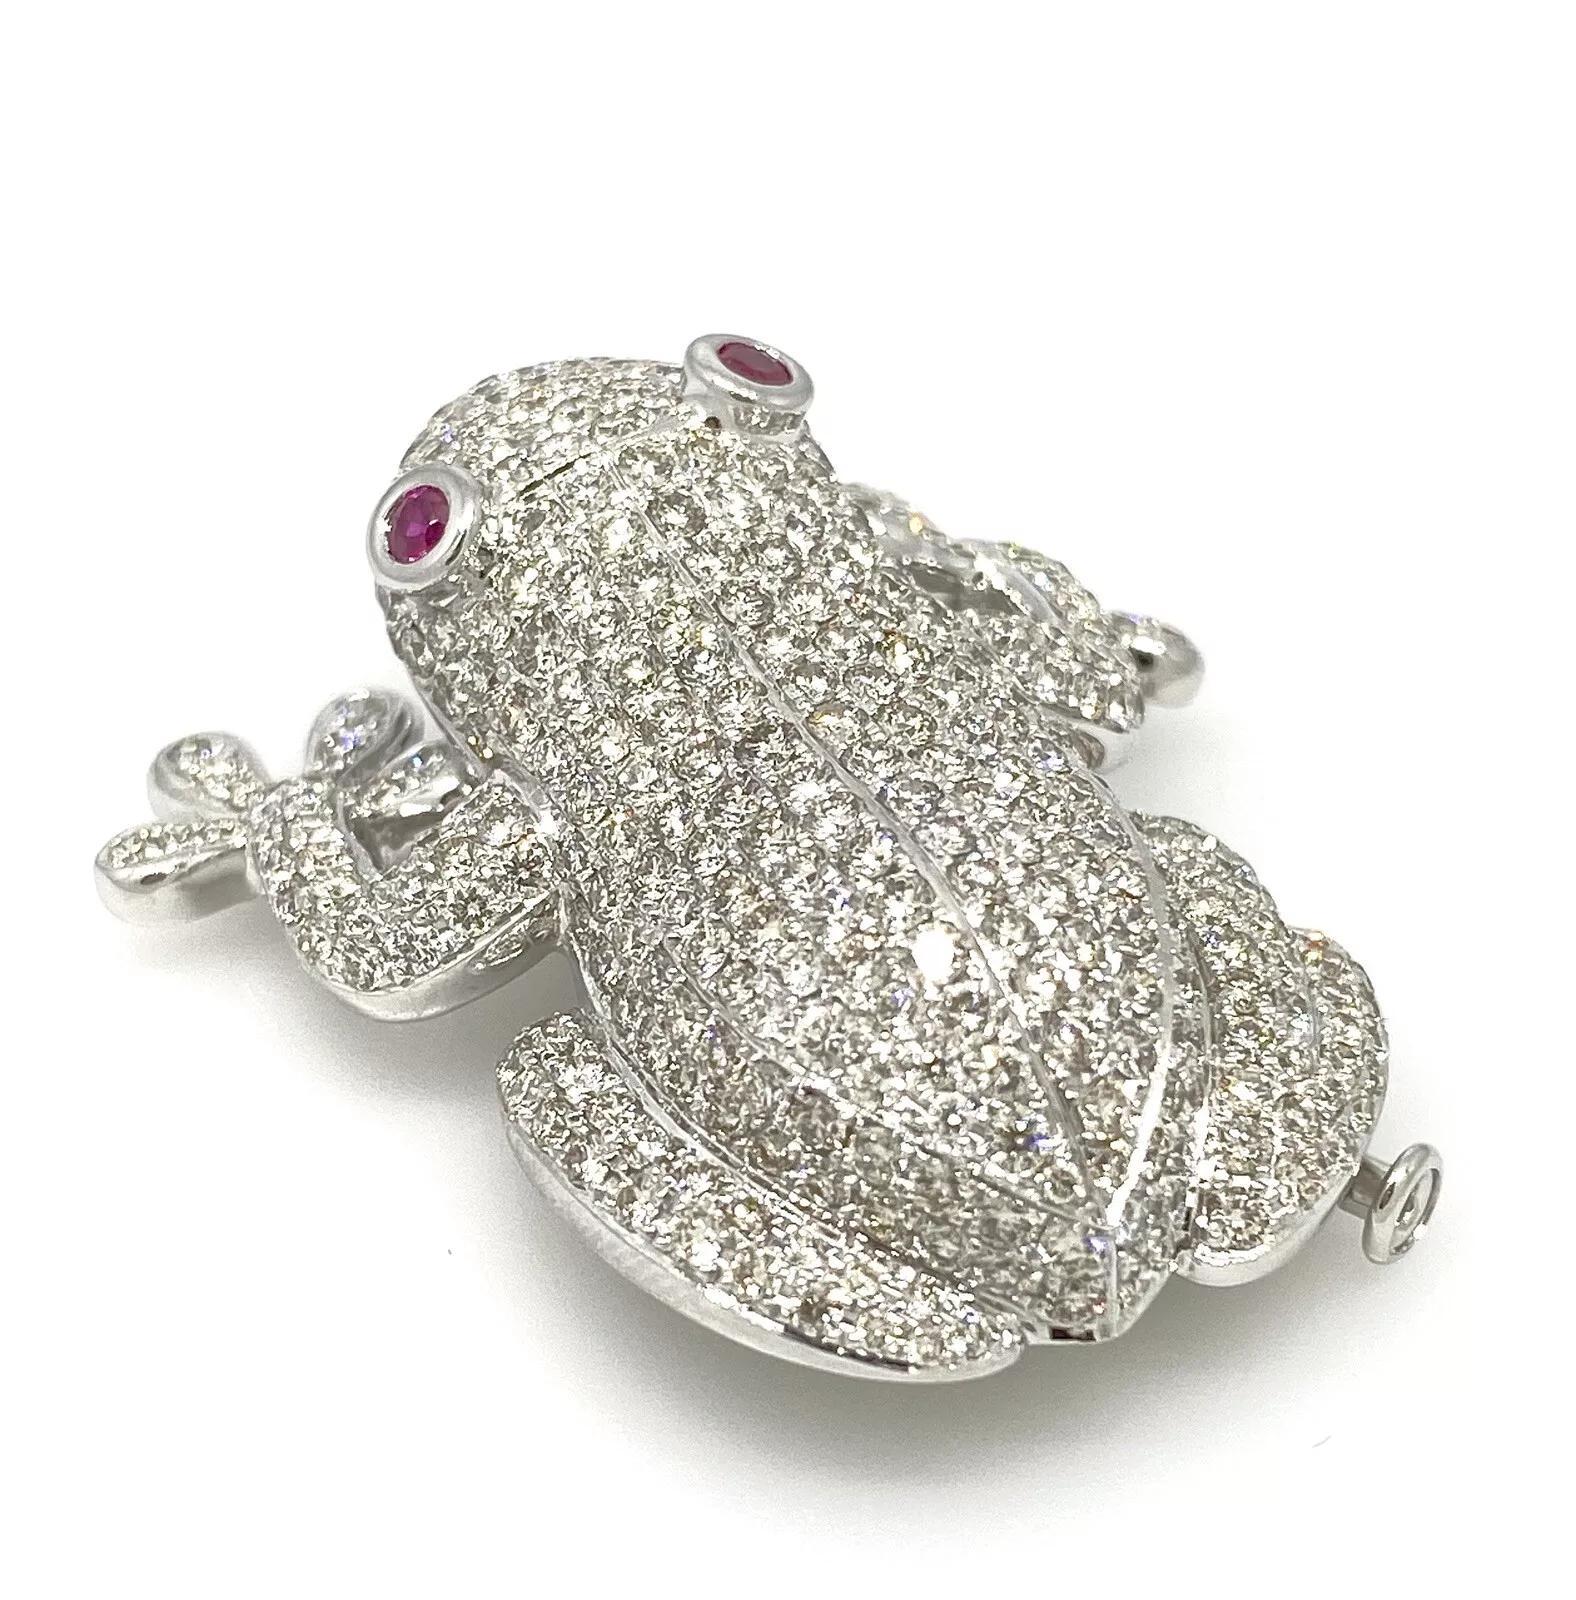 Diamond Pave Tree Frog Pin Brooch in 18k White Gold In Excellent Condition For Sale In La Jolla, CA